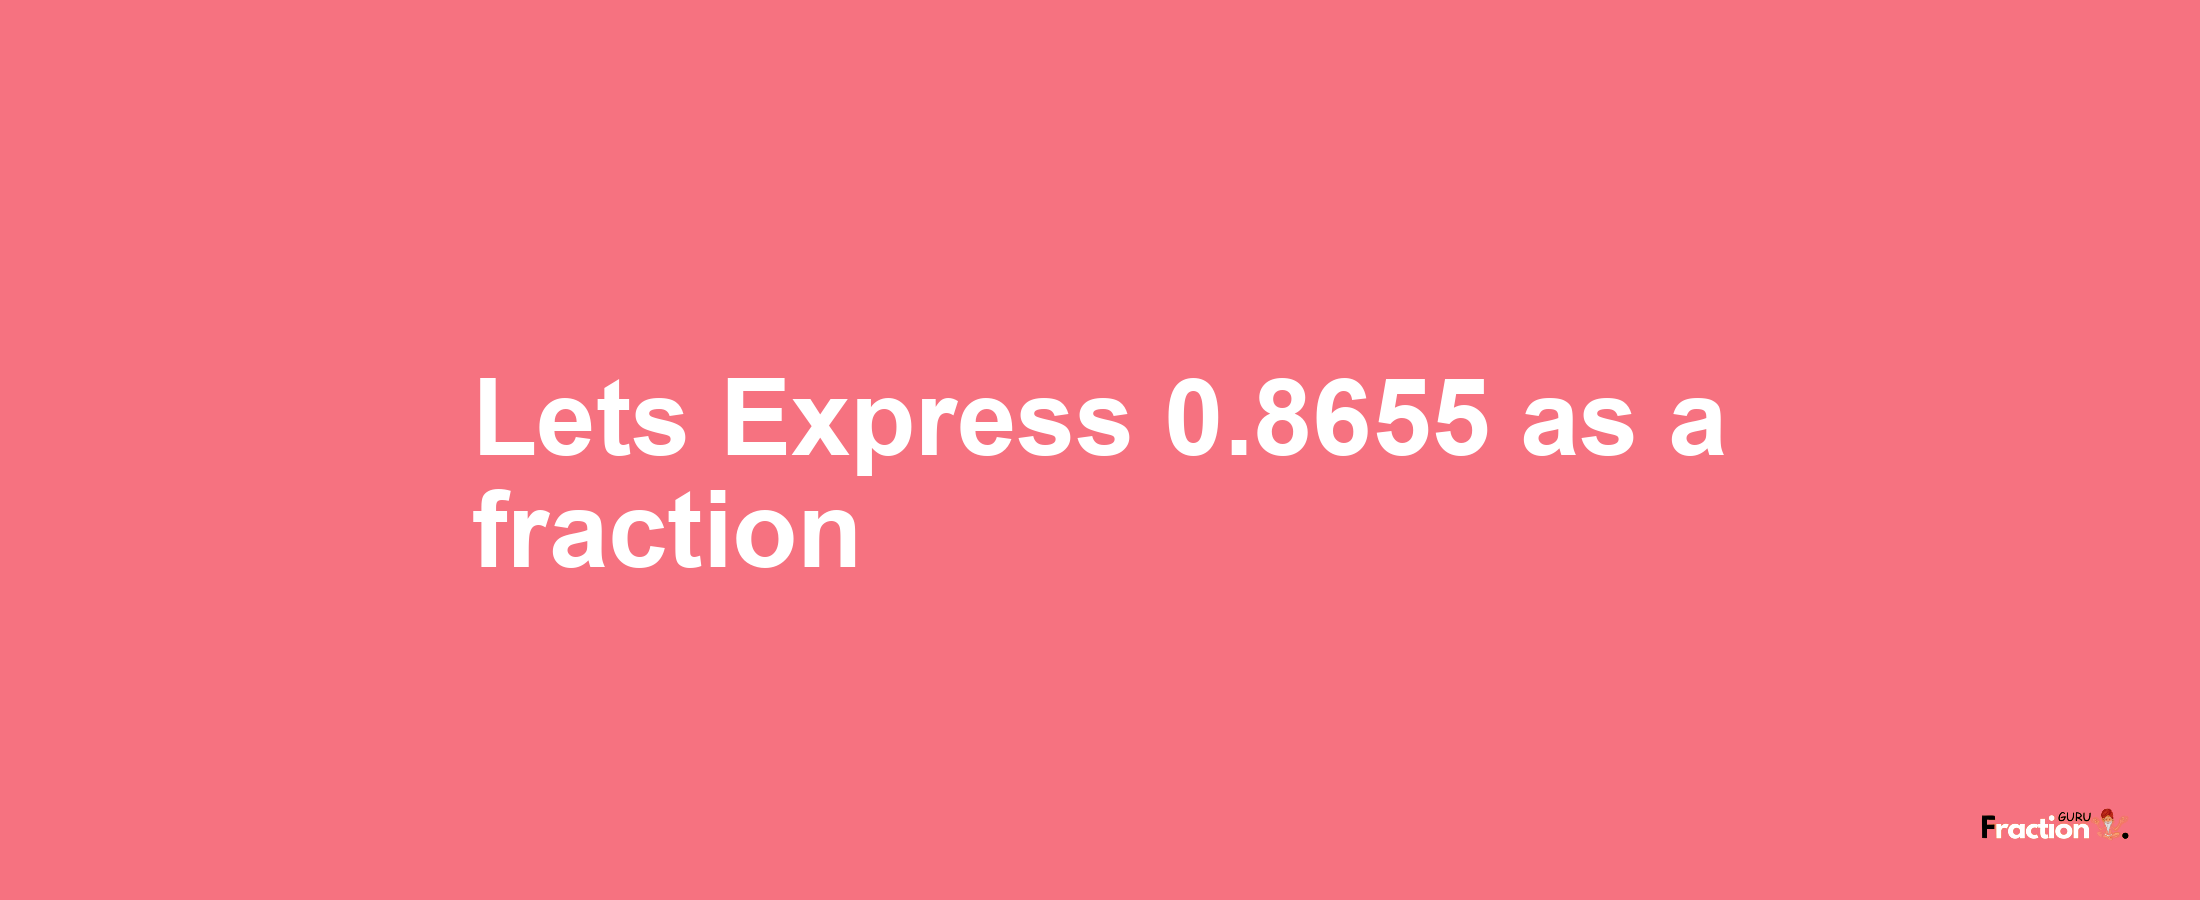 Lets Express 0.8655 as afraction